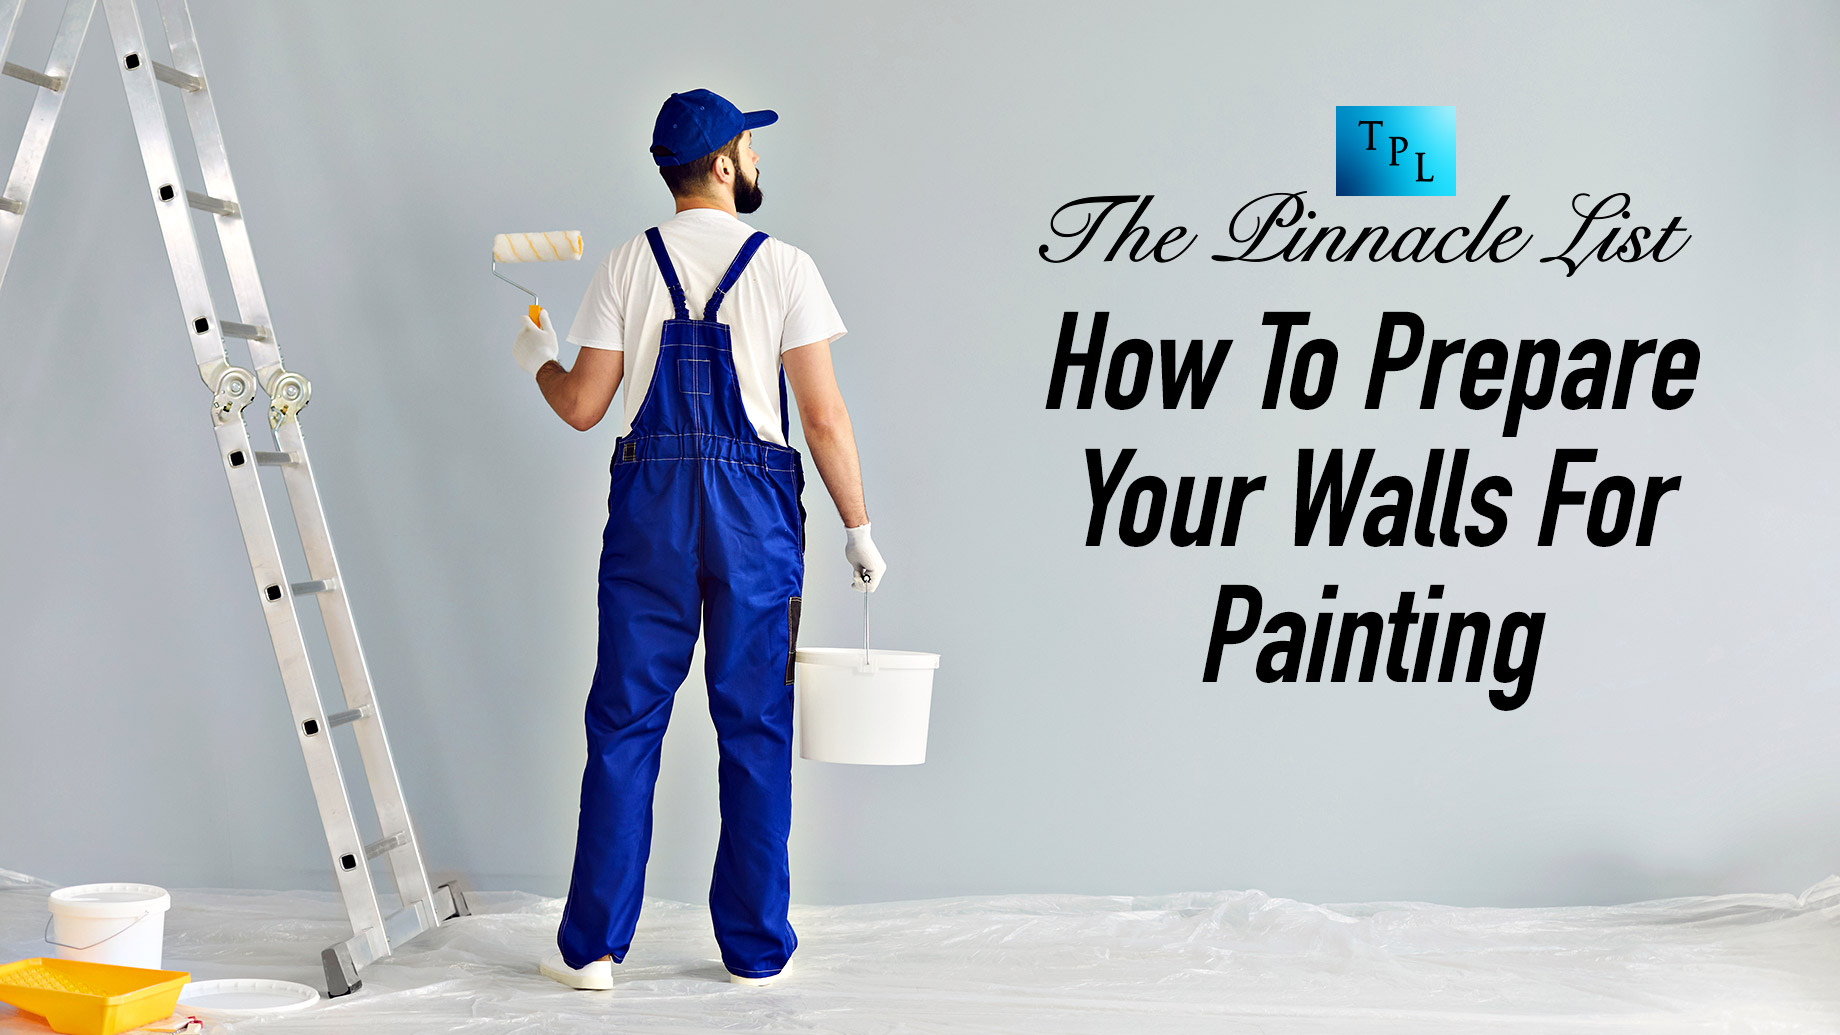 How To Prepare Your Walls For Painting